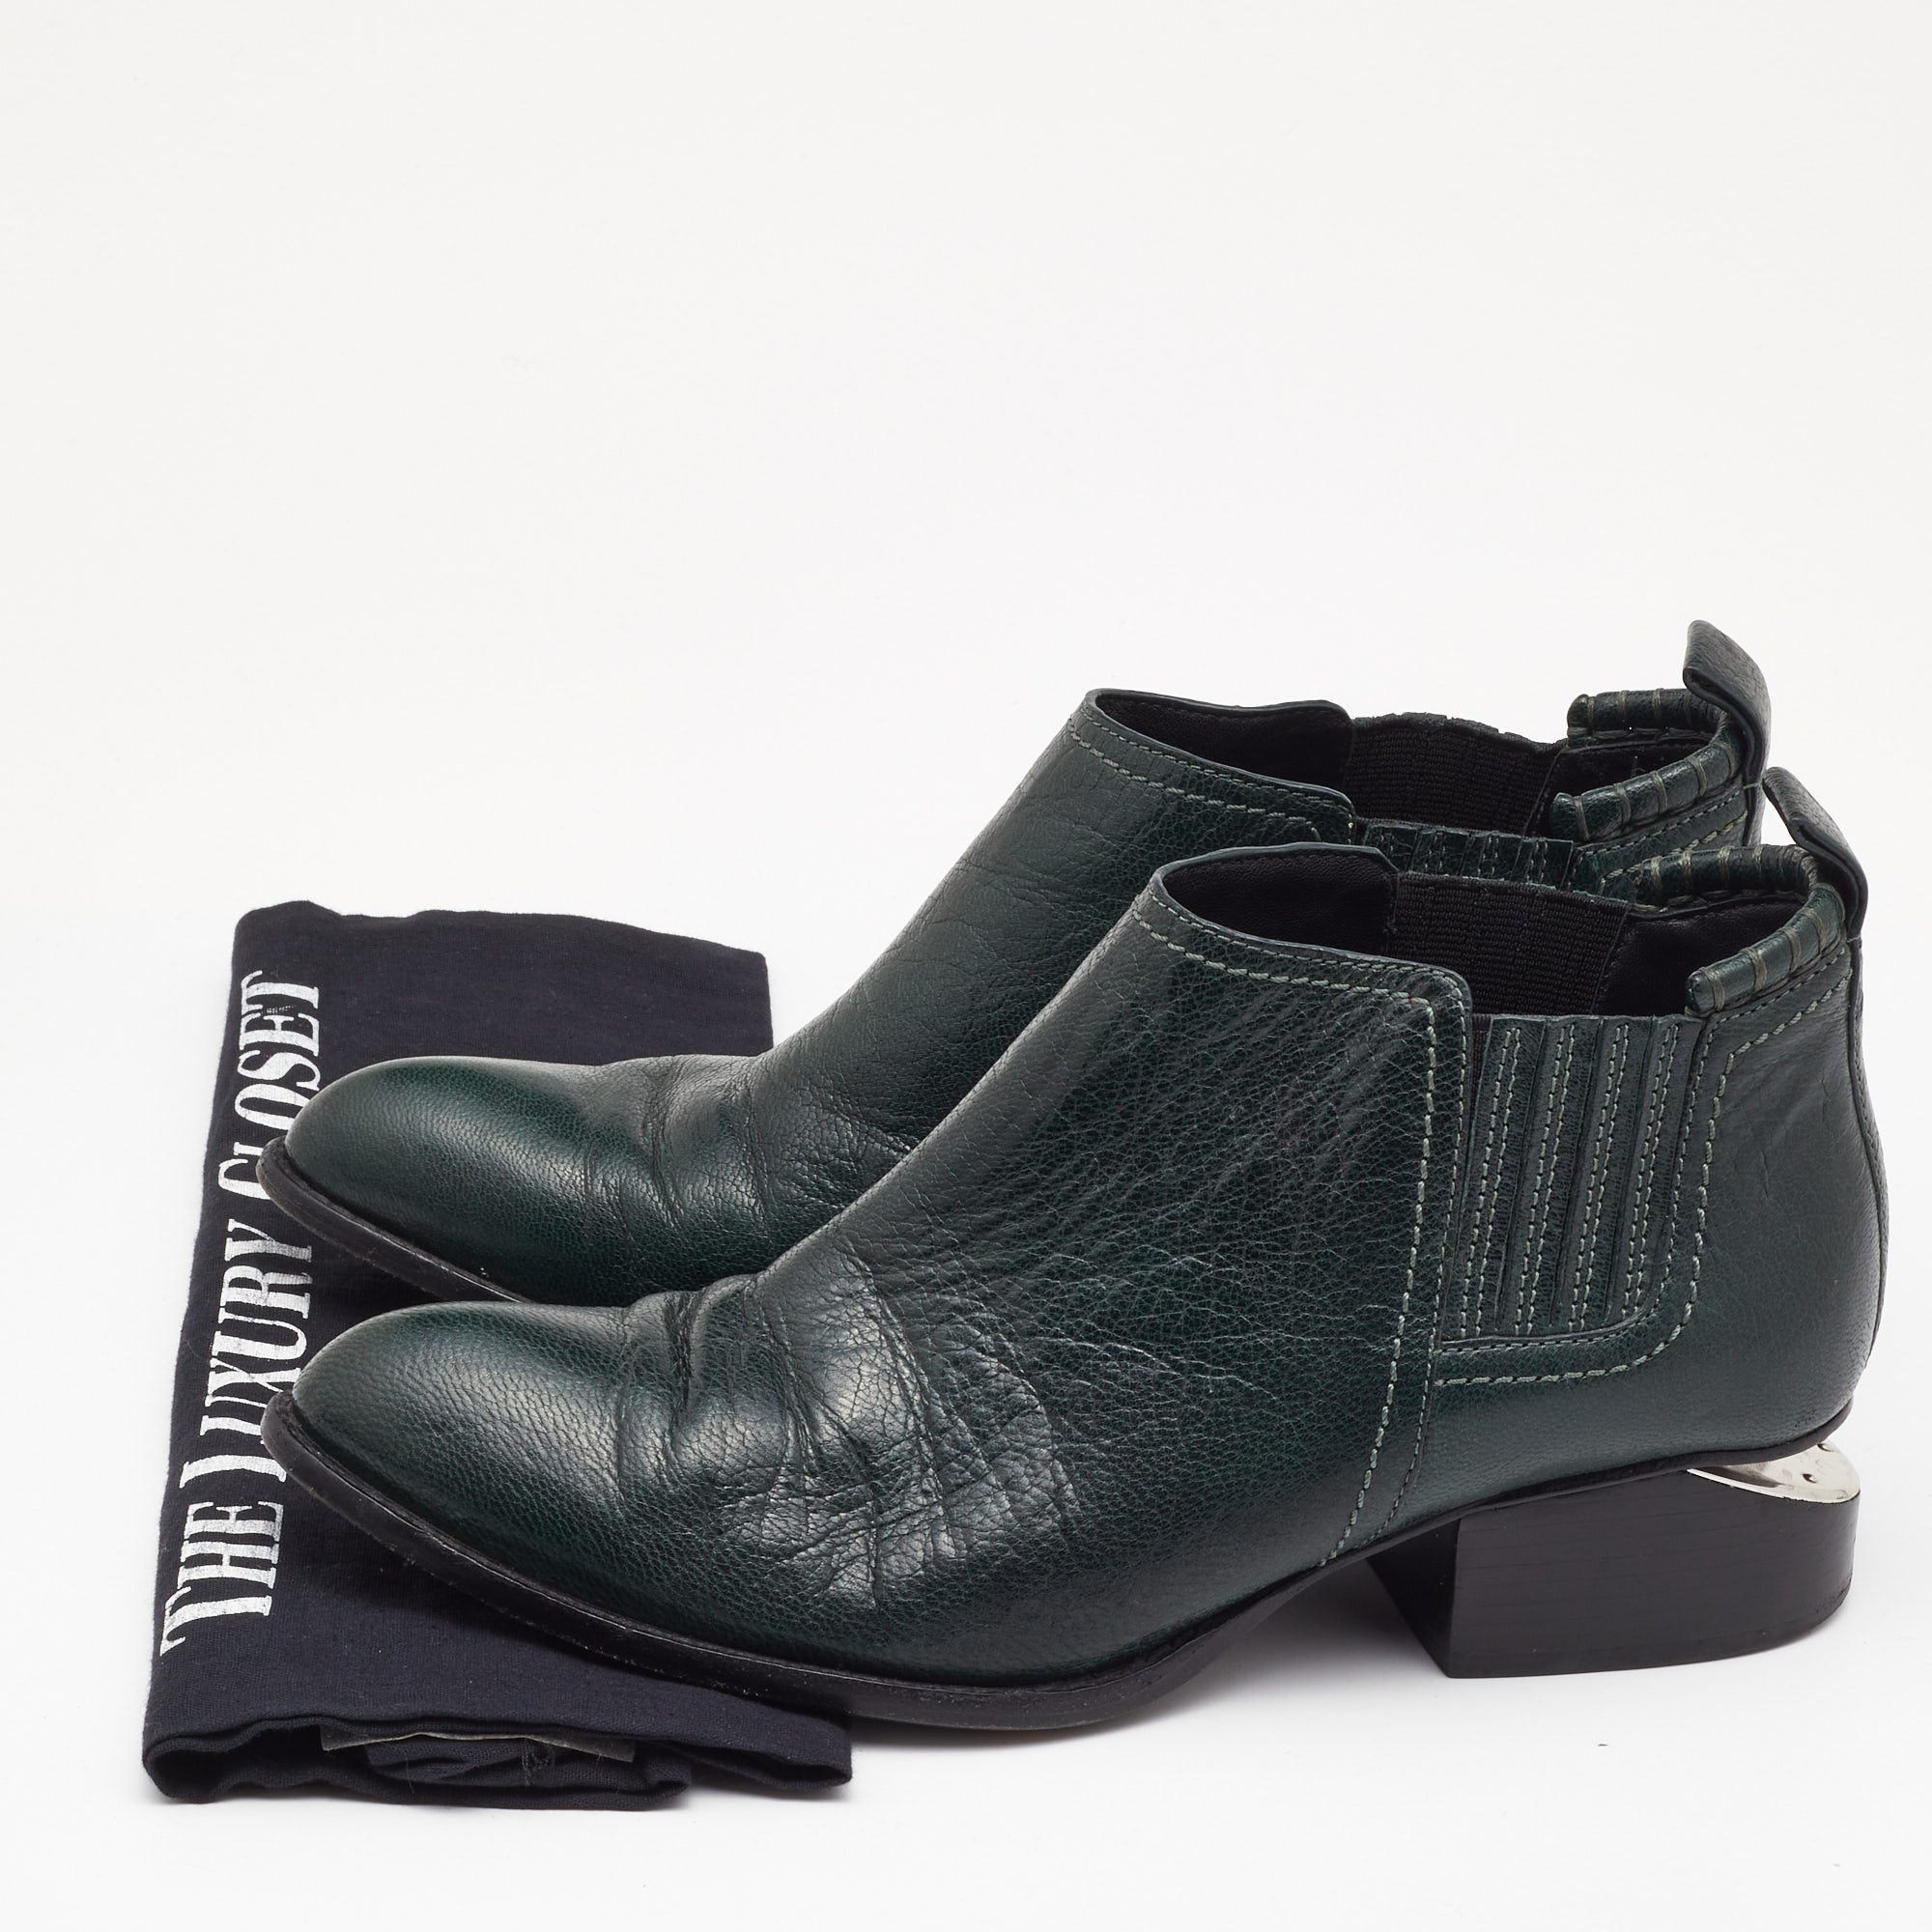 Alexander Wang Green Leather Cut Out Kori Ankle Boots Size 38